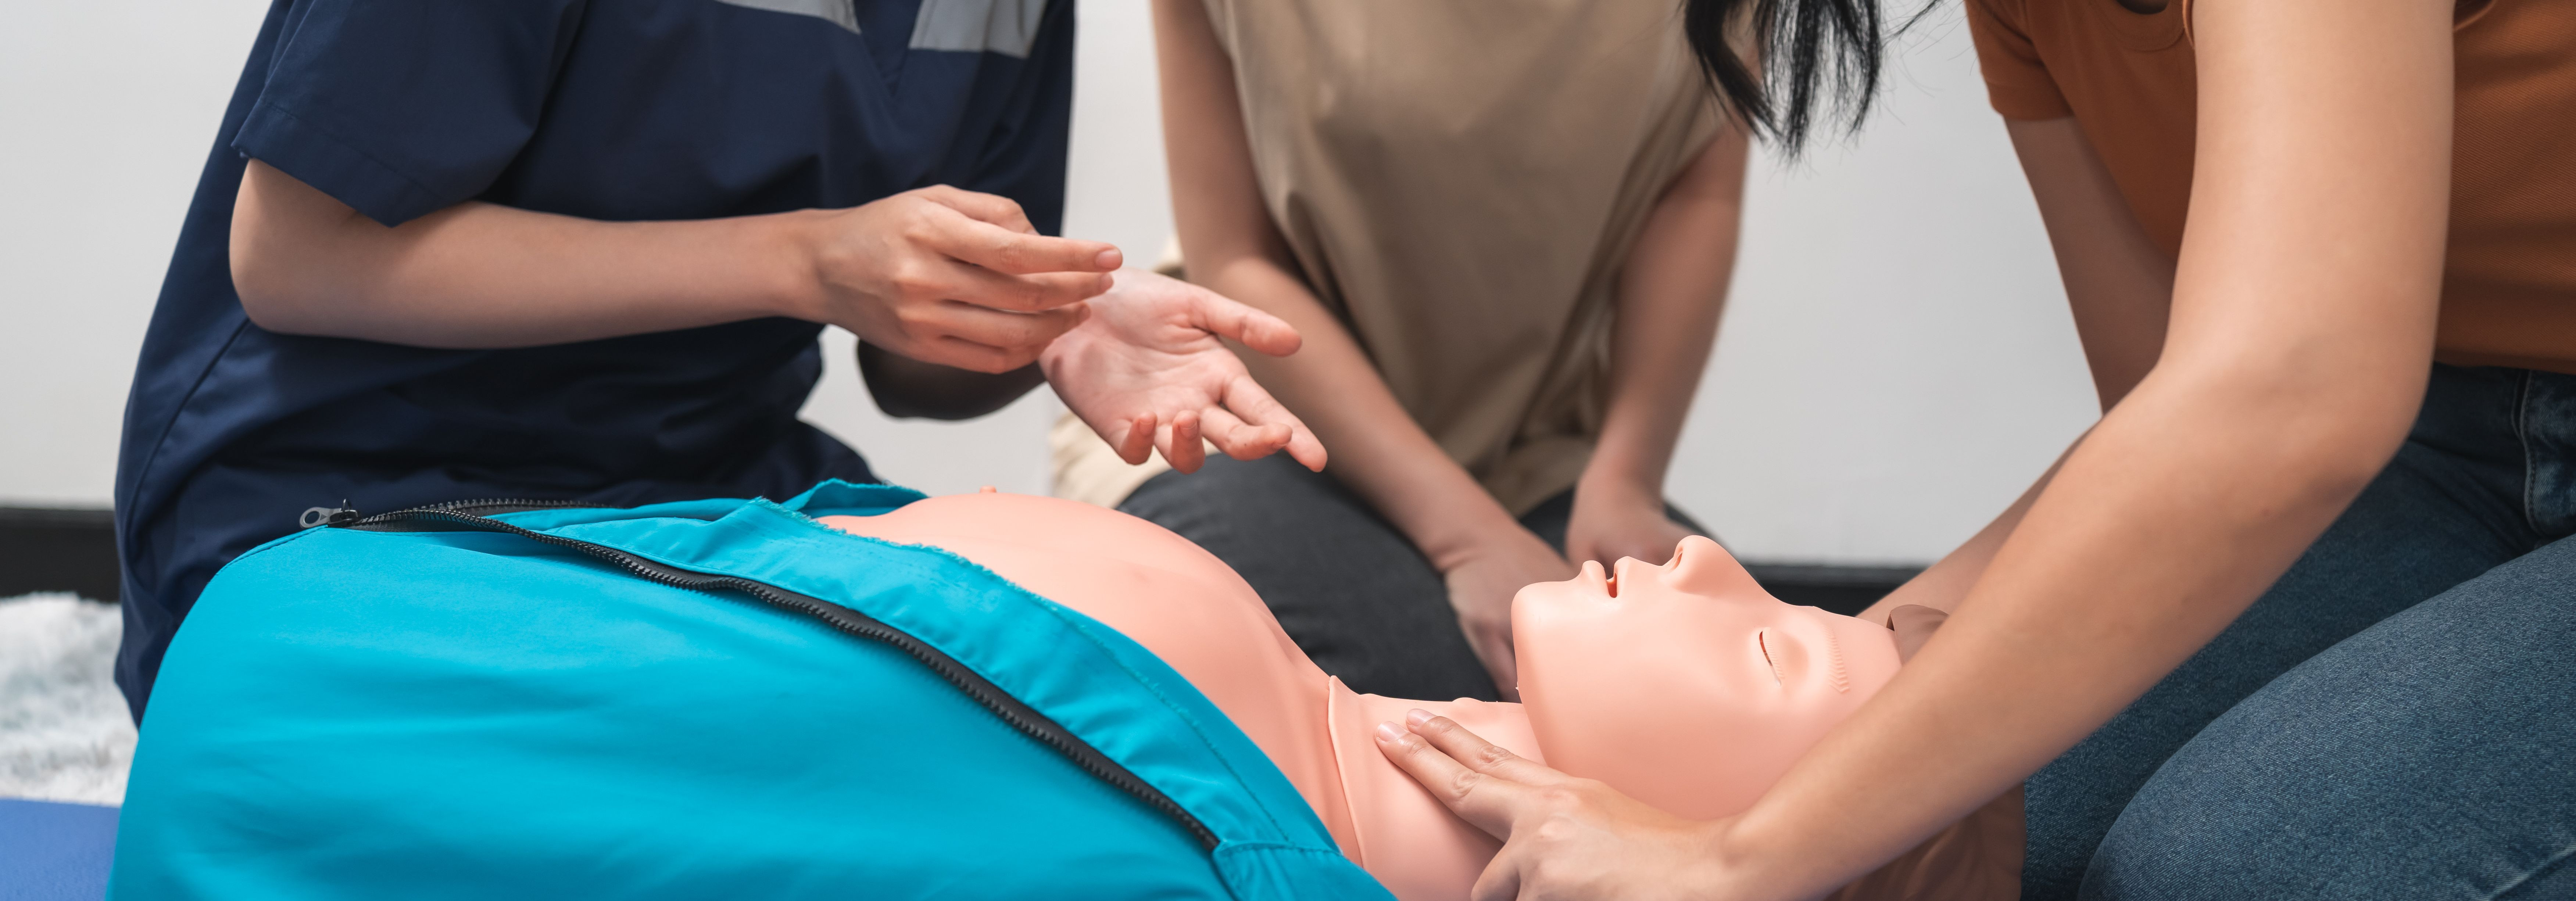 At TEADMISTEST OÜ, we believe that the power to save lives rests in the hands of each individual. With our comprehensive first aid training programs and health 